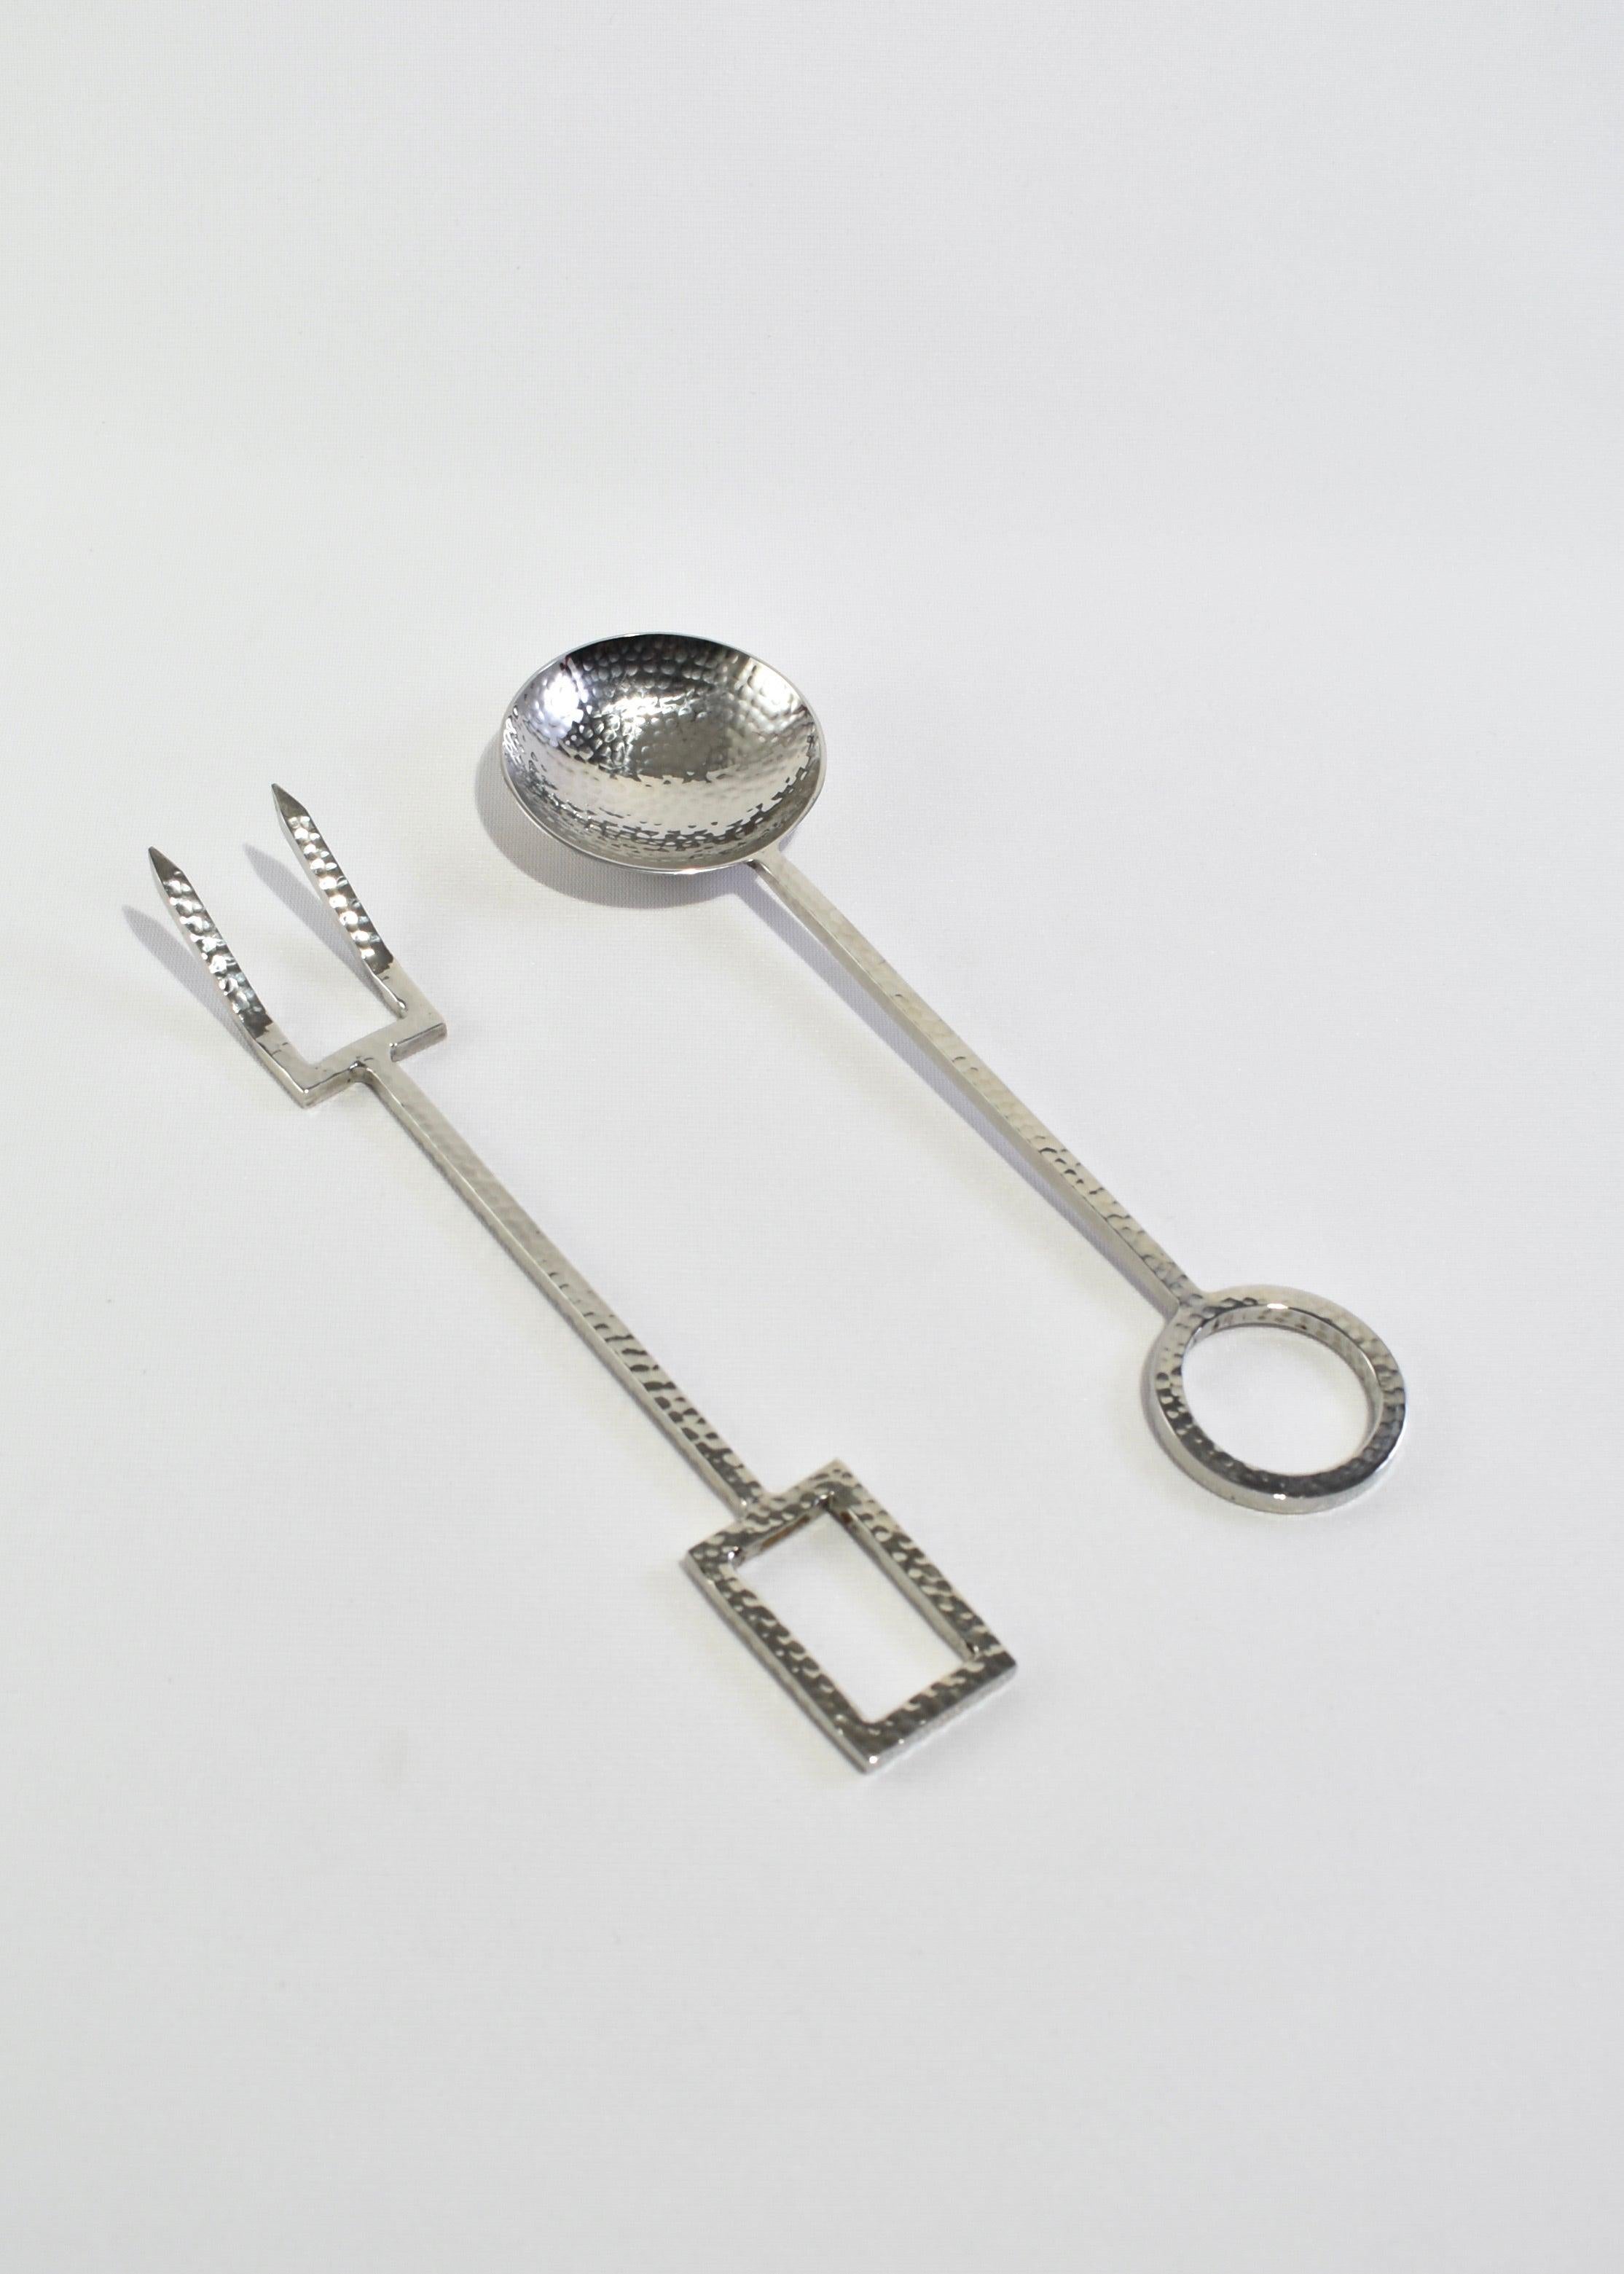 Rare, hammered stainless steel serving set with geometric details. Designed by Michael Aram.